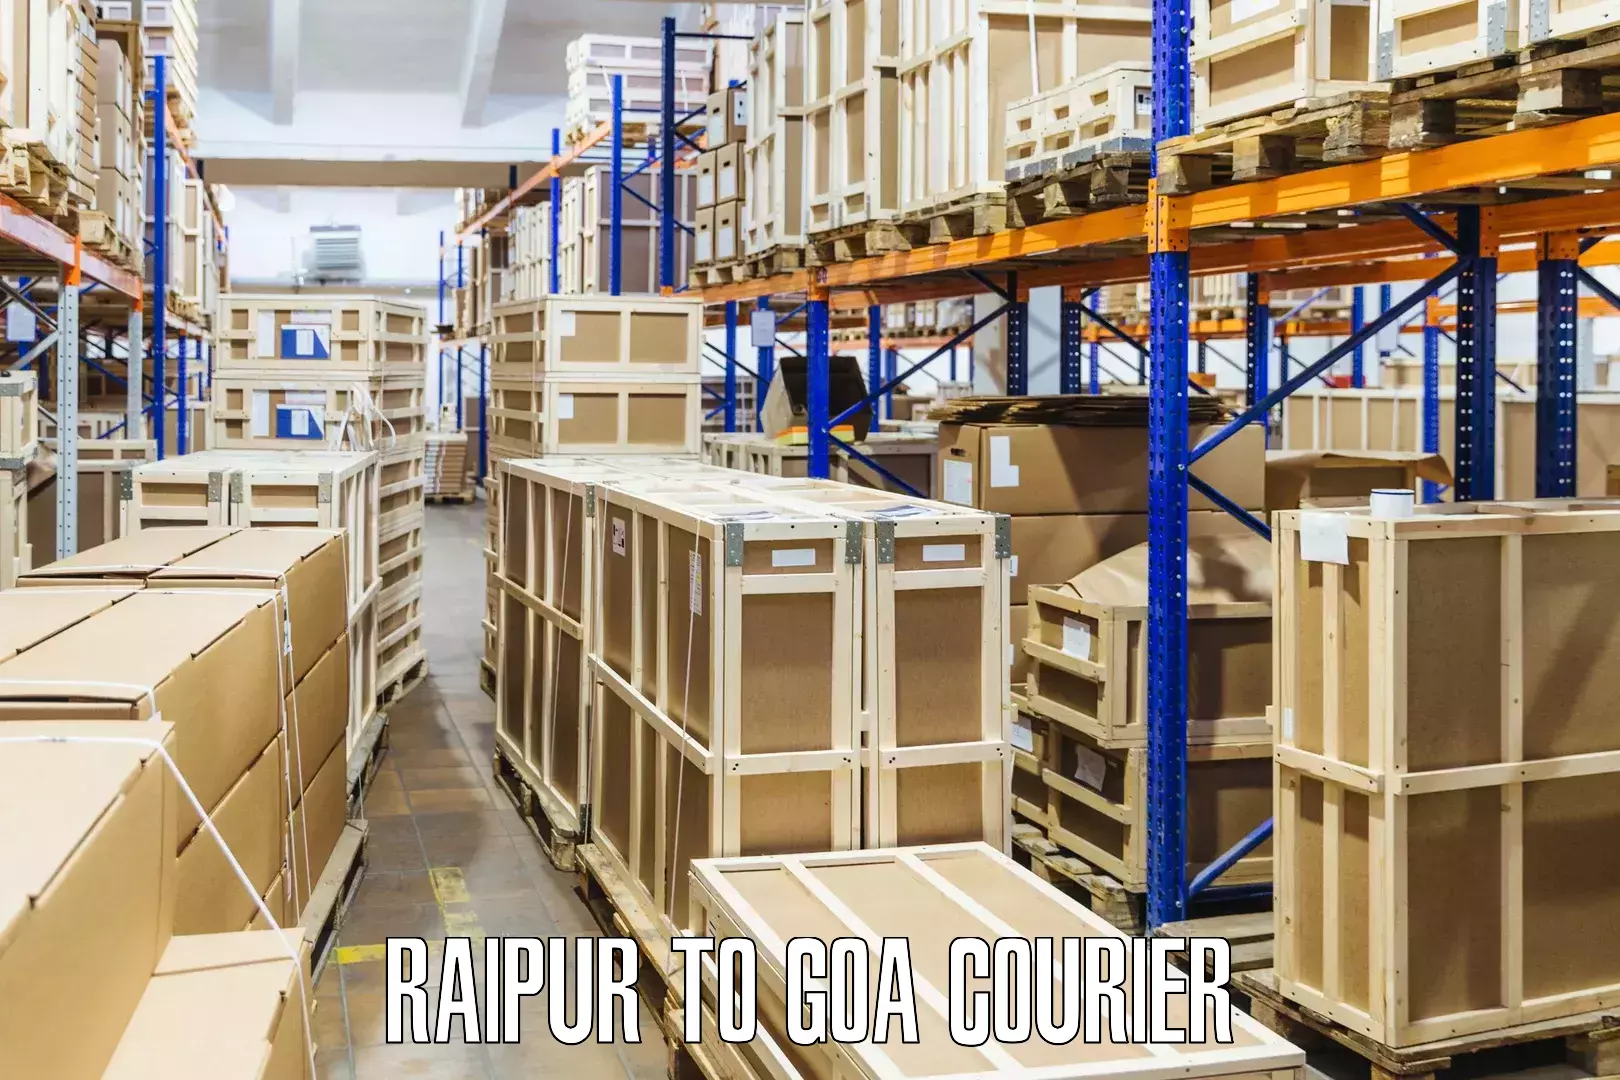 Small business couriers Raipur to Goa